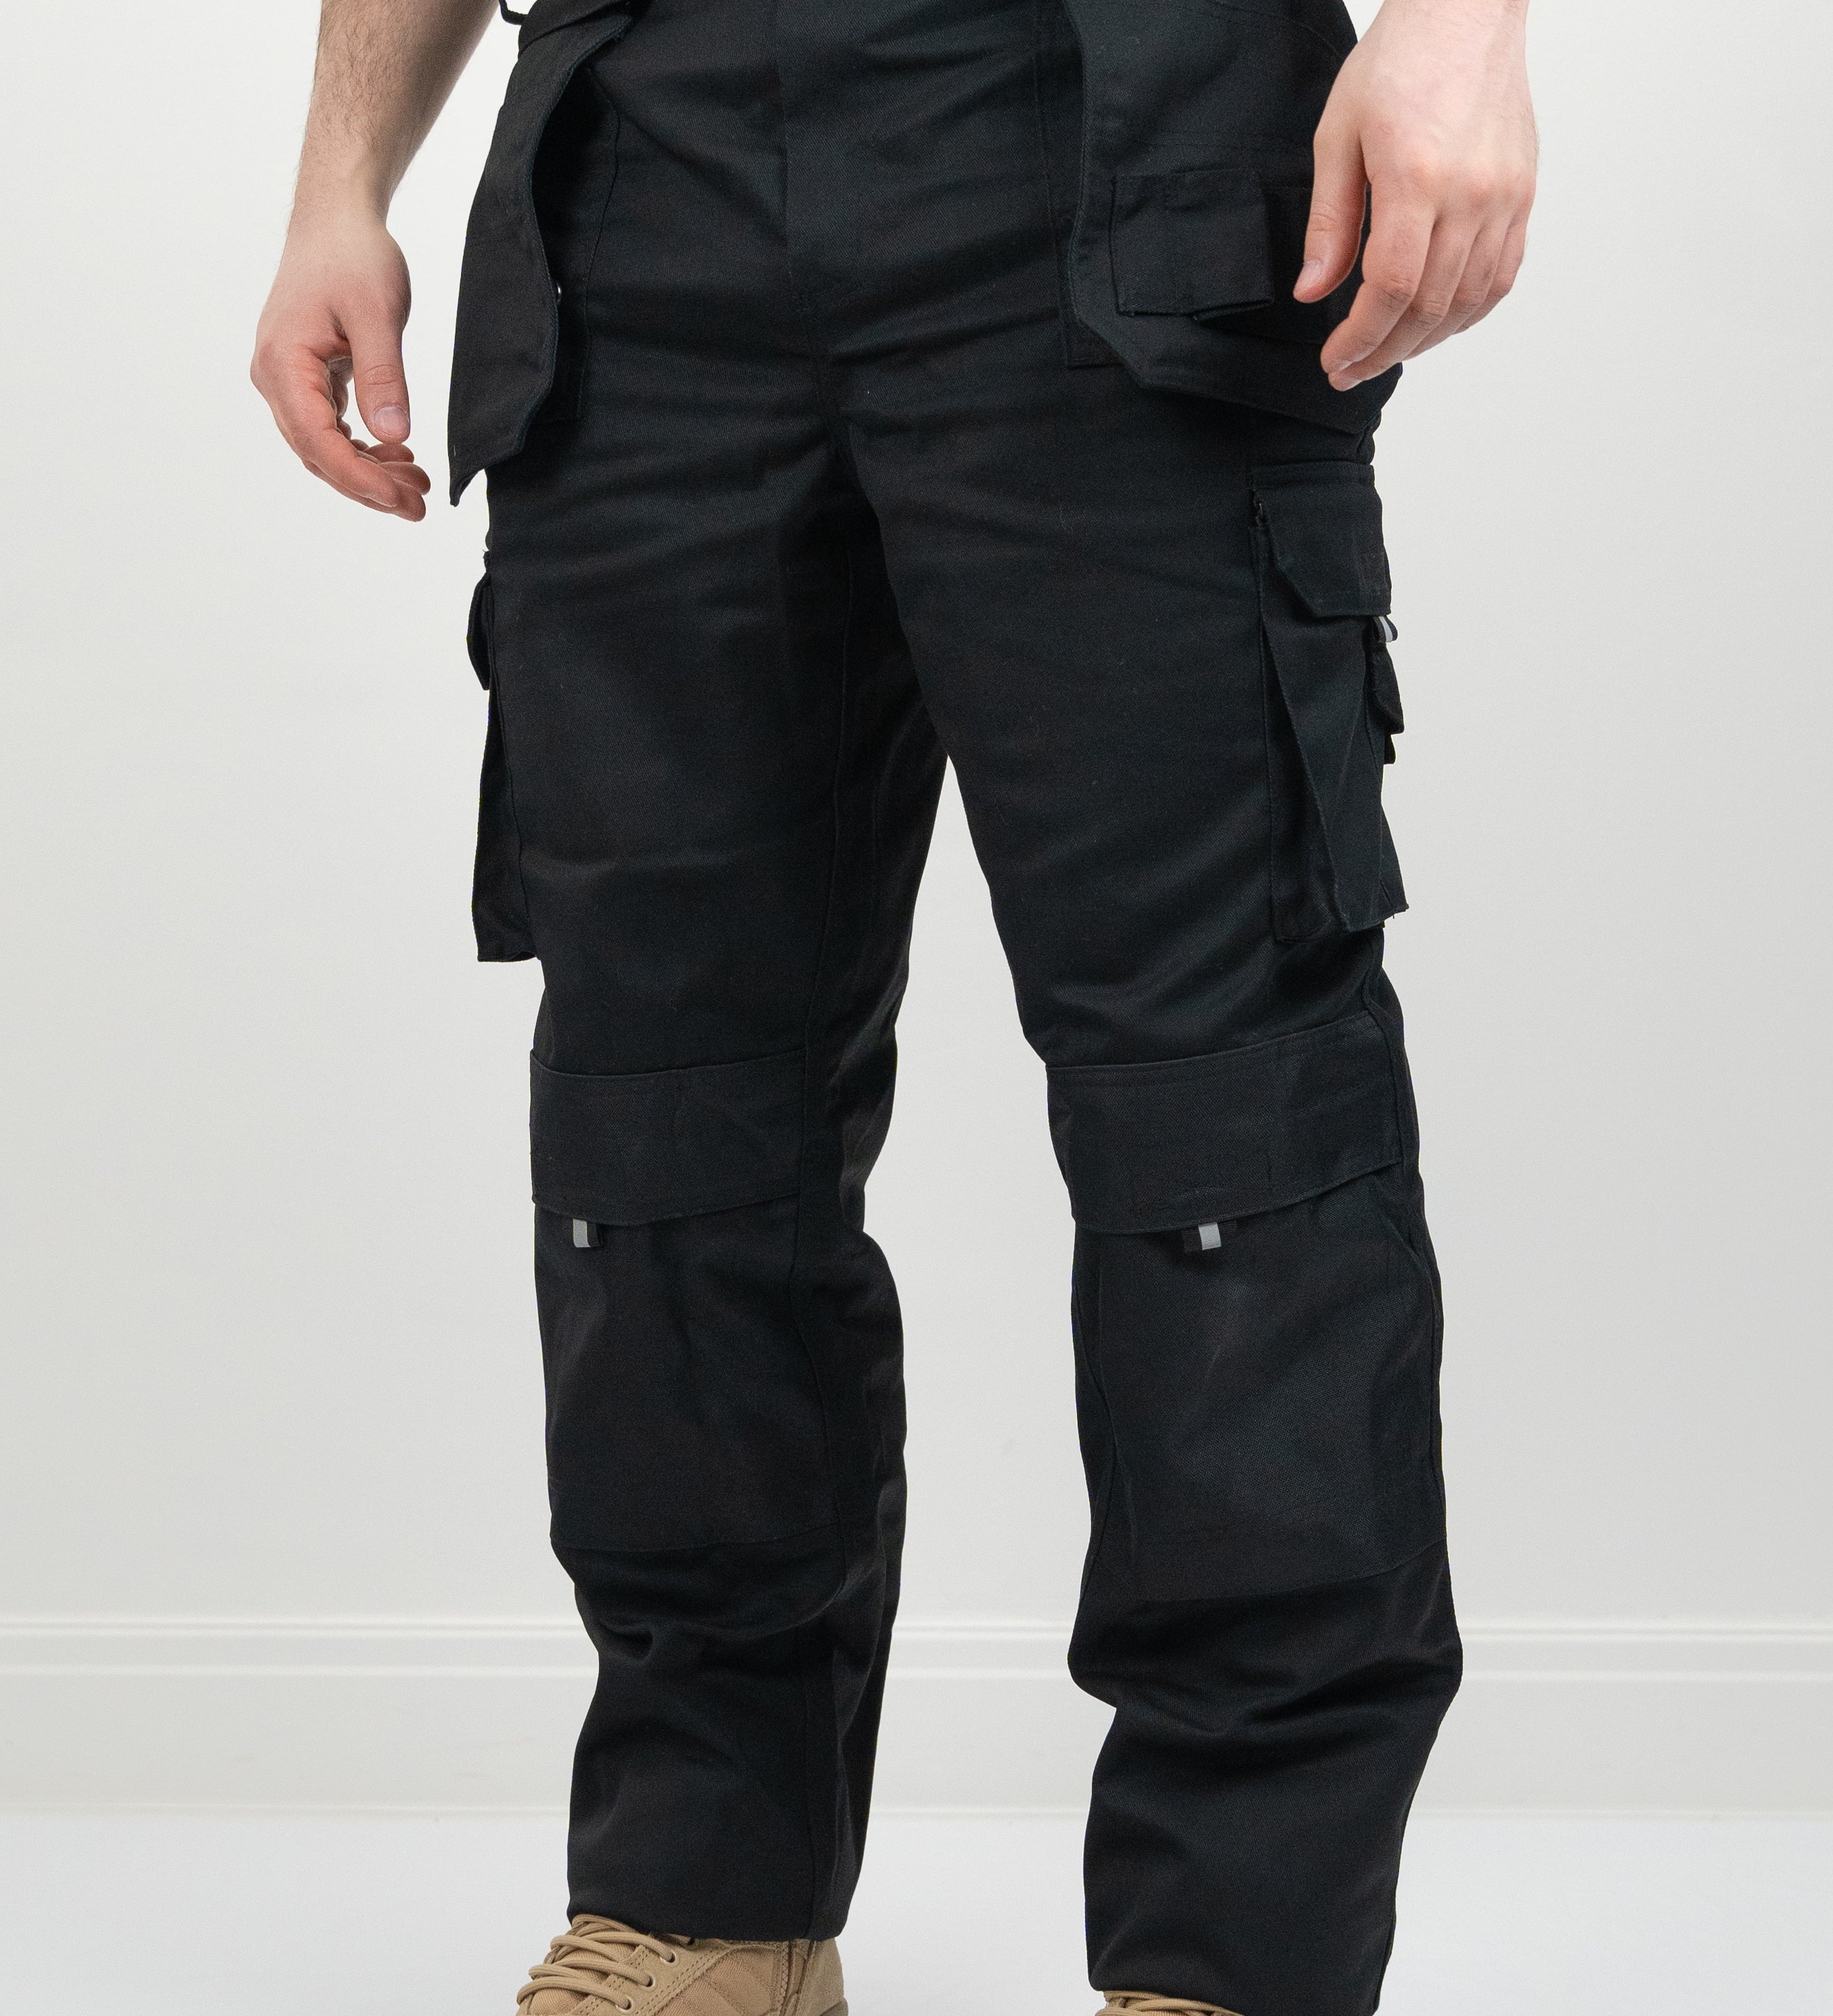 black work trousers with knee protection and pockets